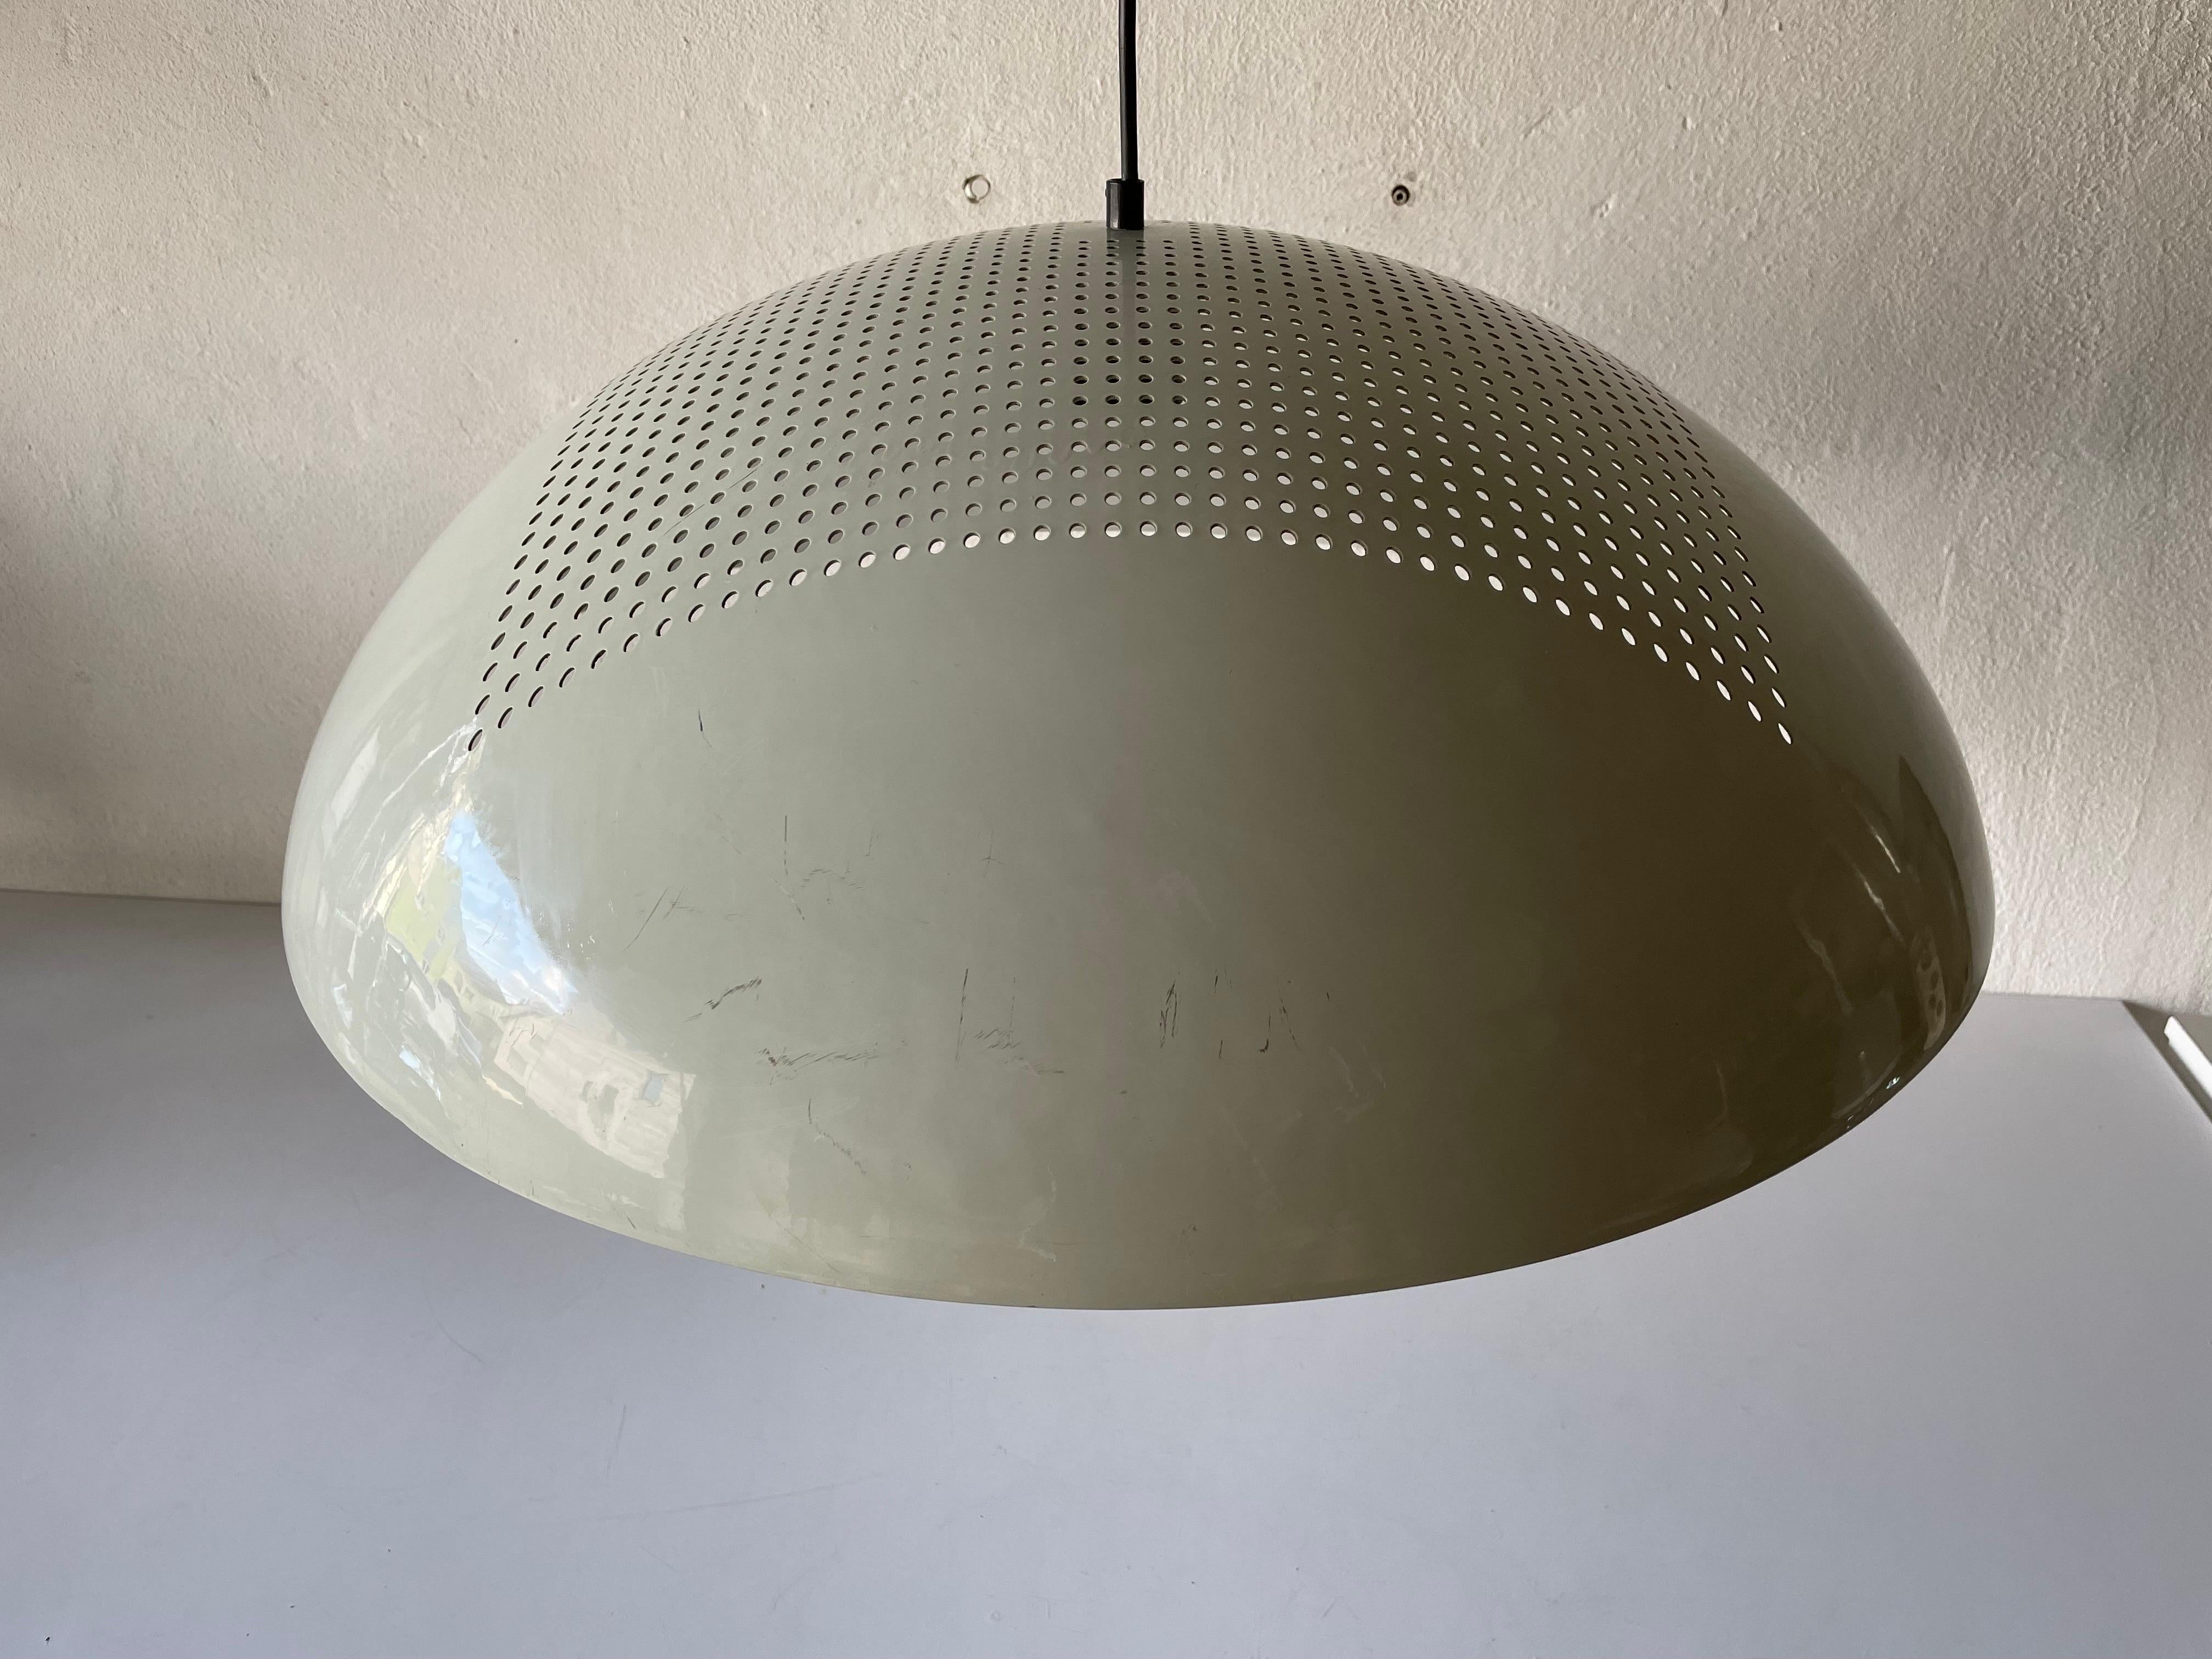 Large White Metal Pendant Lamp Piuluce s.r.l Vicenza, 1960s, Italy

Lampshade is in very good vintage condition.

This lamp works with E27 light bulbs. 
Wired and suitable to use with 220V and 110V for all countries.

Measurements:
Diameter and